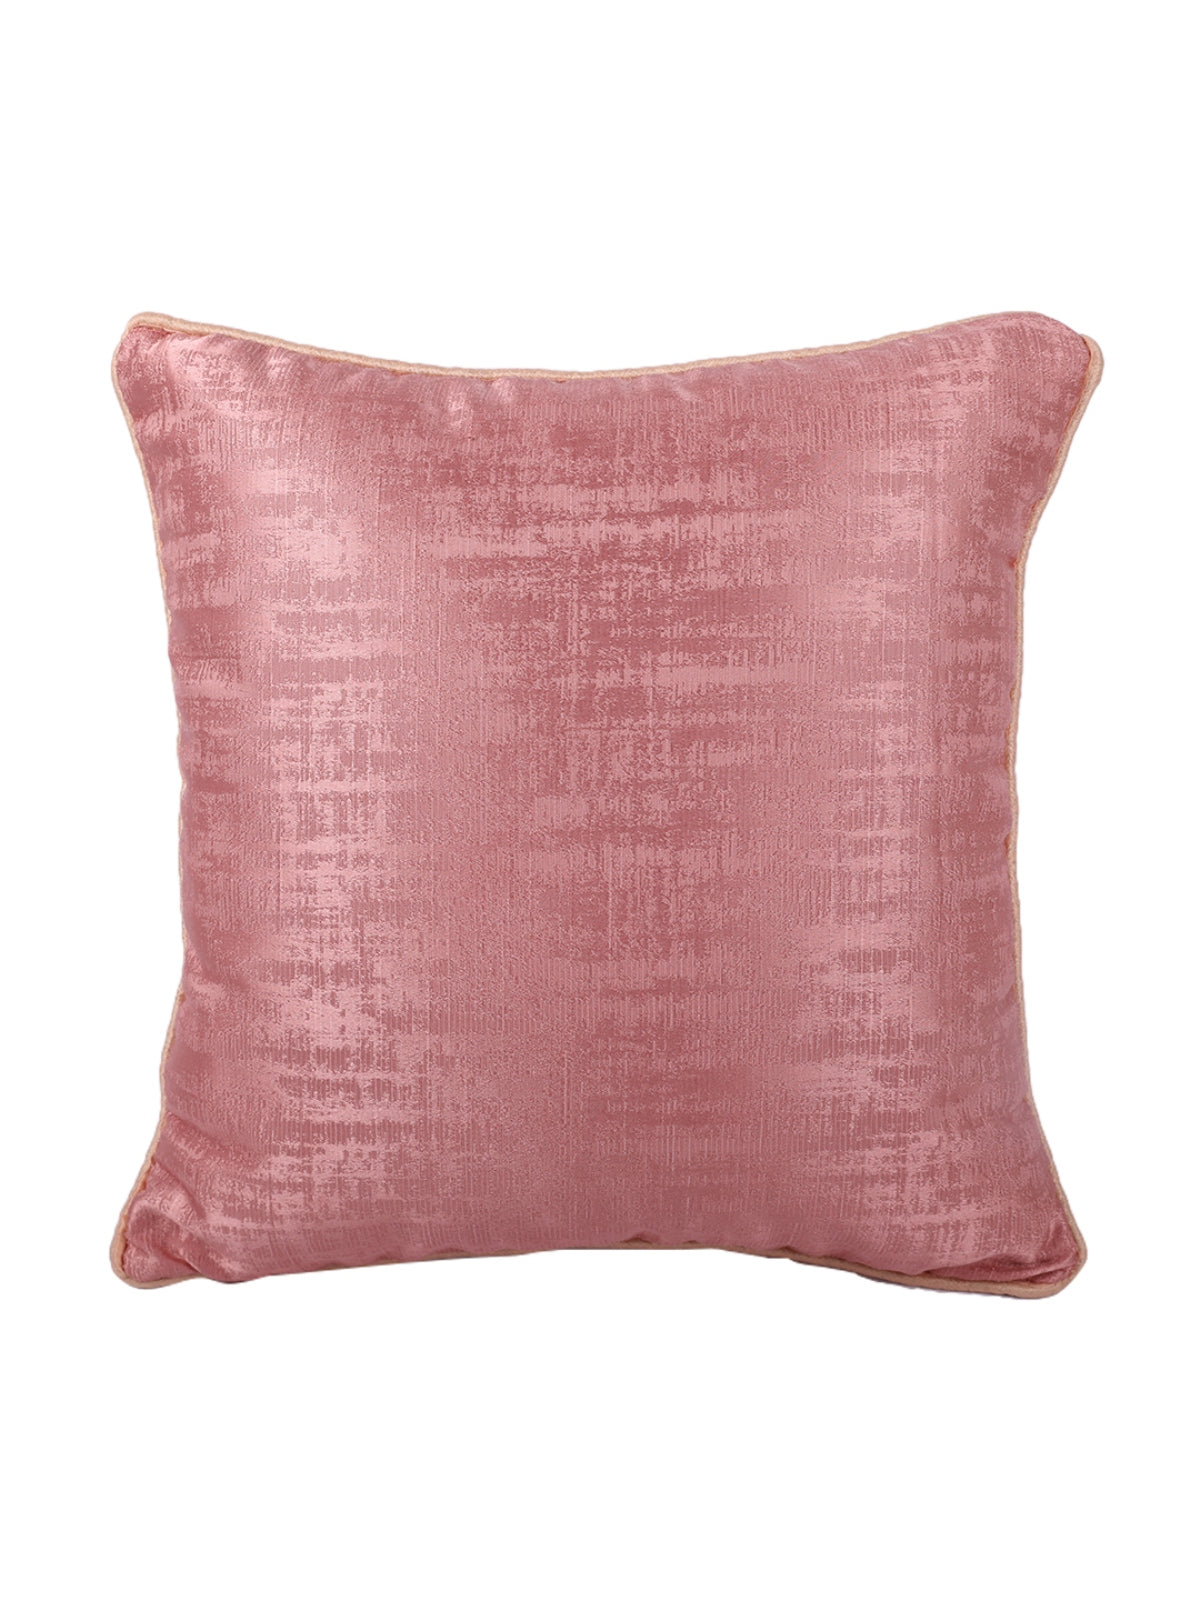 Pink Set of 5 Jacquard 16 Inch x 16 Inch Cushion Covers